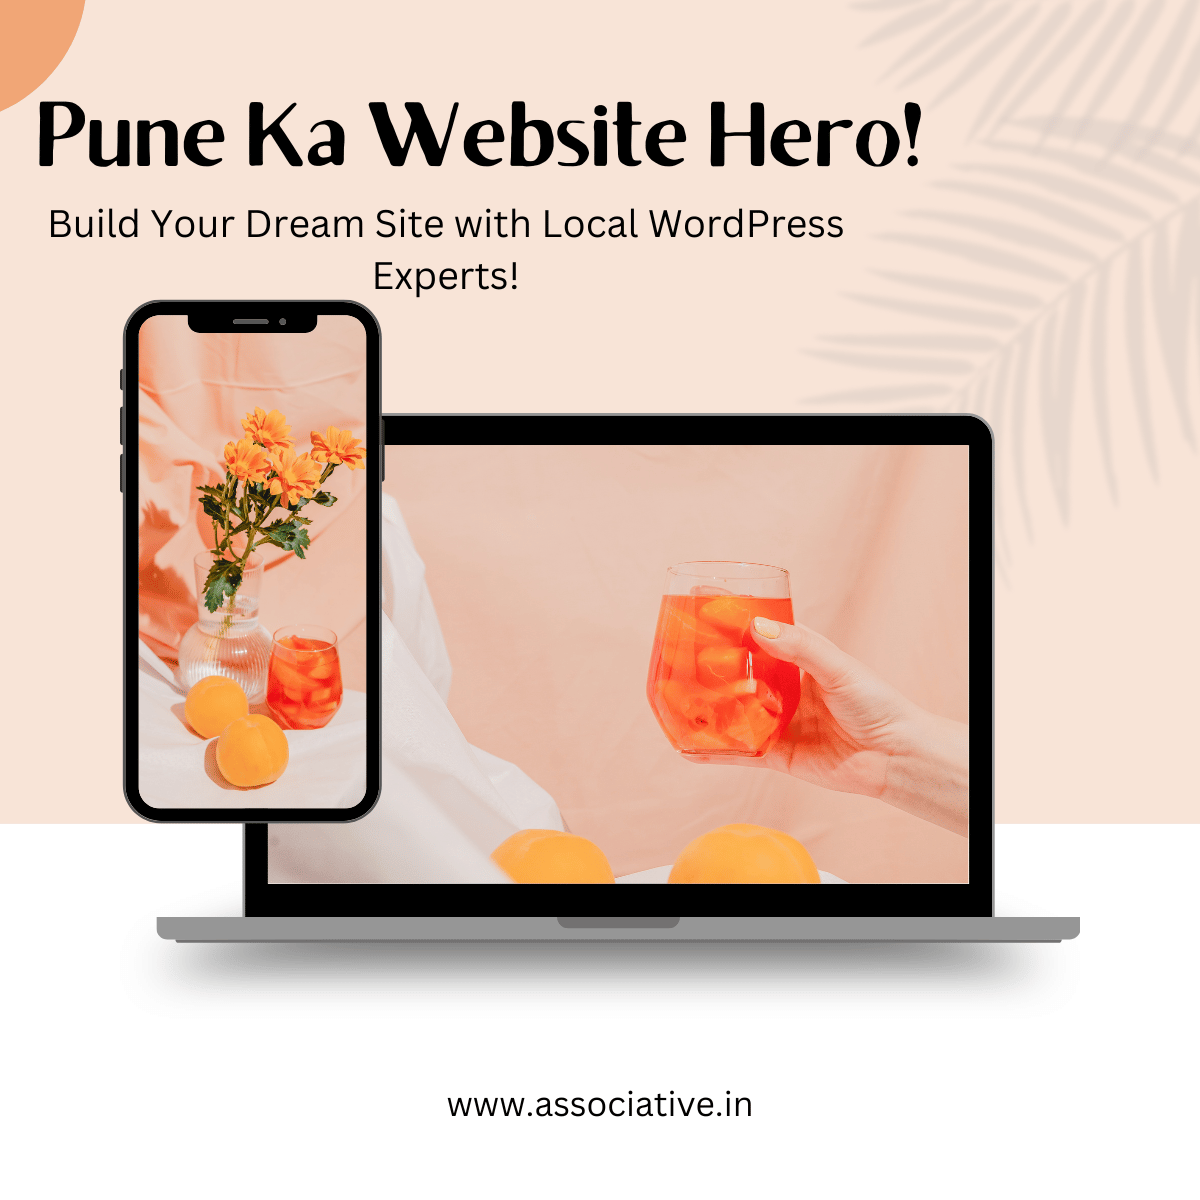 Pune Ka Website Hero! Build Your Dream Site with Local WordPress Experts!